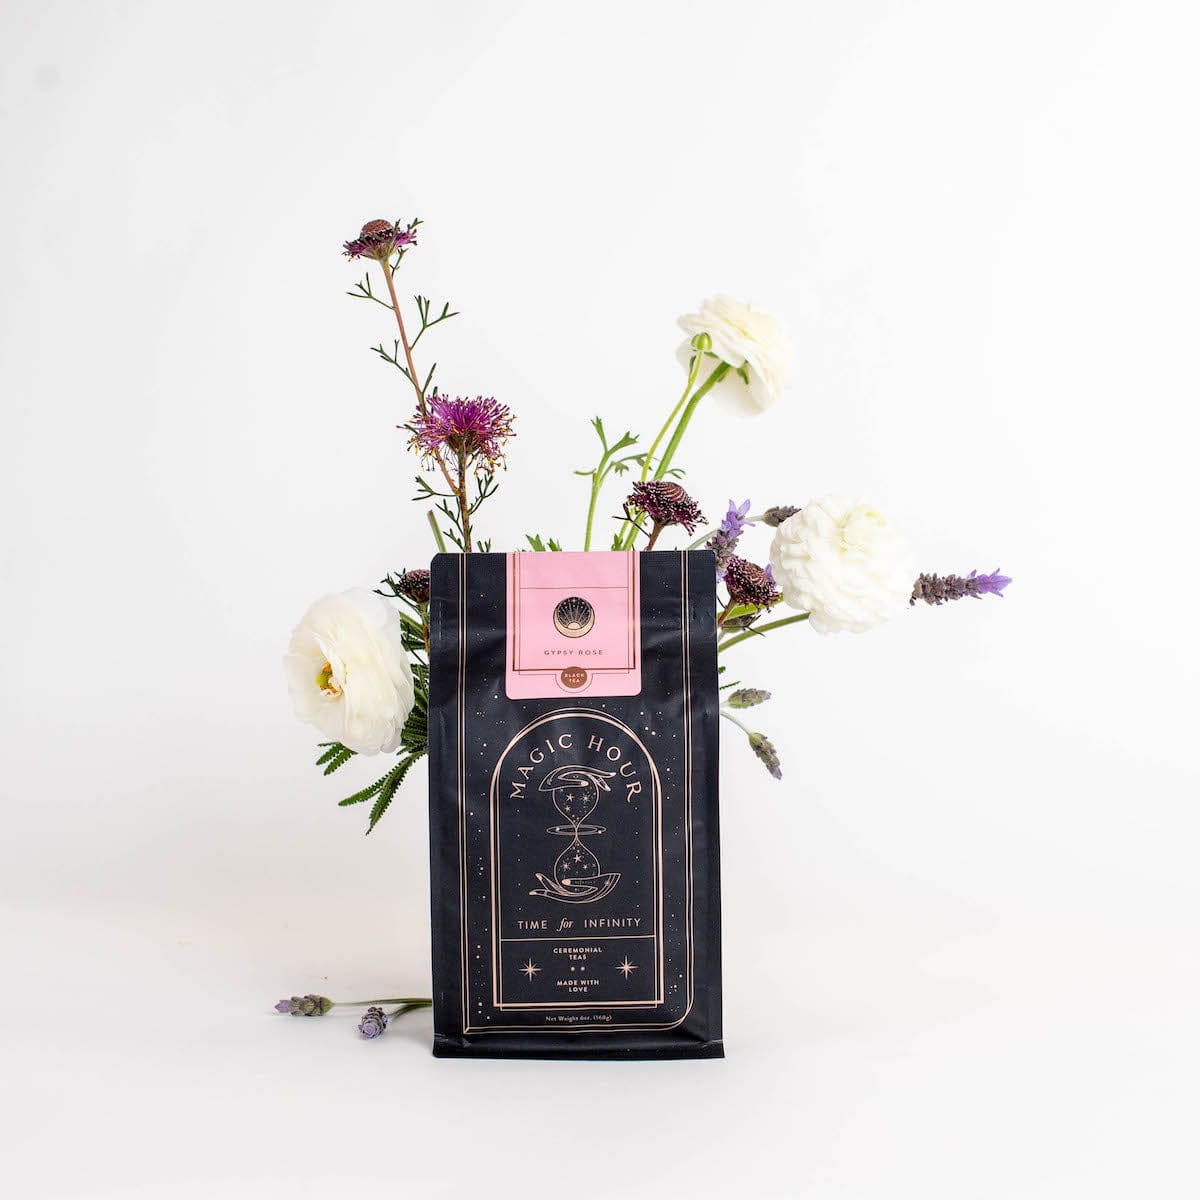 A black and pink package of &quot;Gypsy Rose Black Tea&quot; by Magic Hour stands on a white surface, adorned with the label &quot;Time for Infinity&quot;. A few white and purple flowers, including lavender, are creatively arranged around and behind the package, giving it a fresh, elegant look.